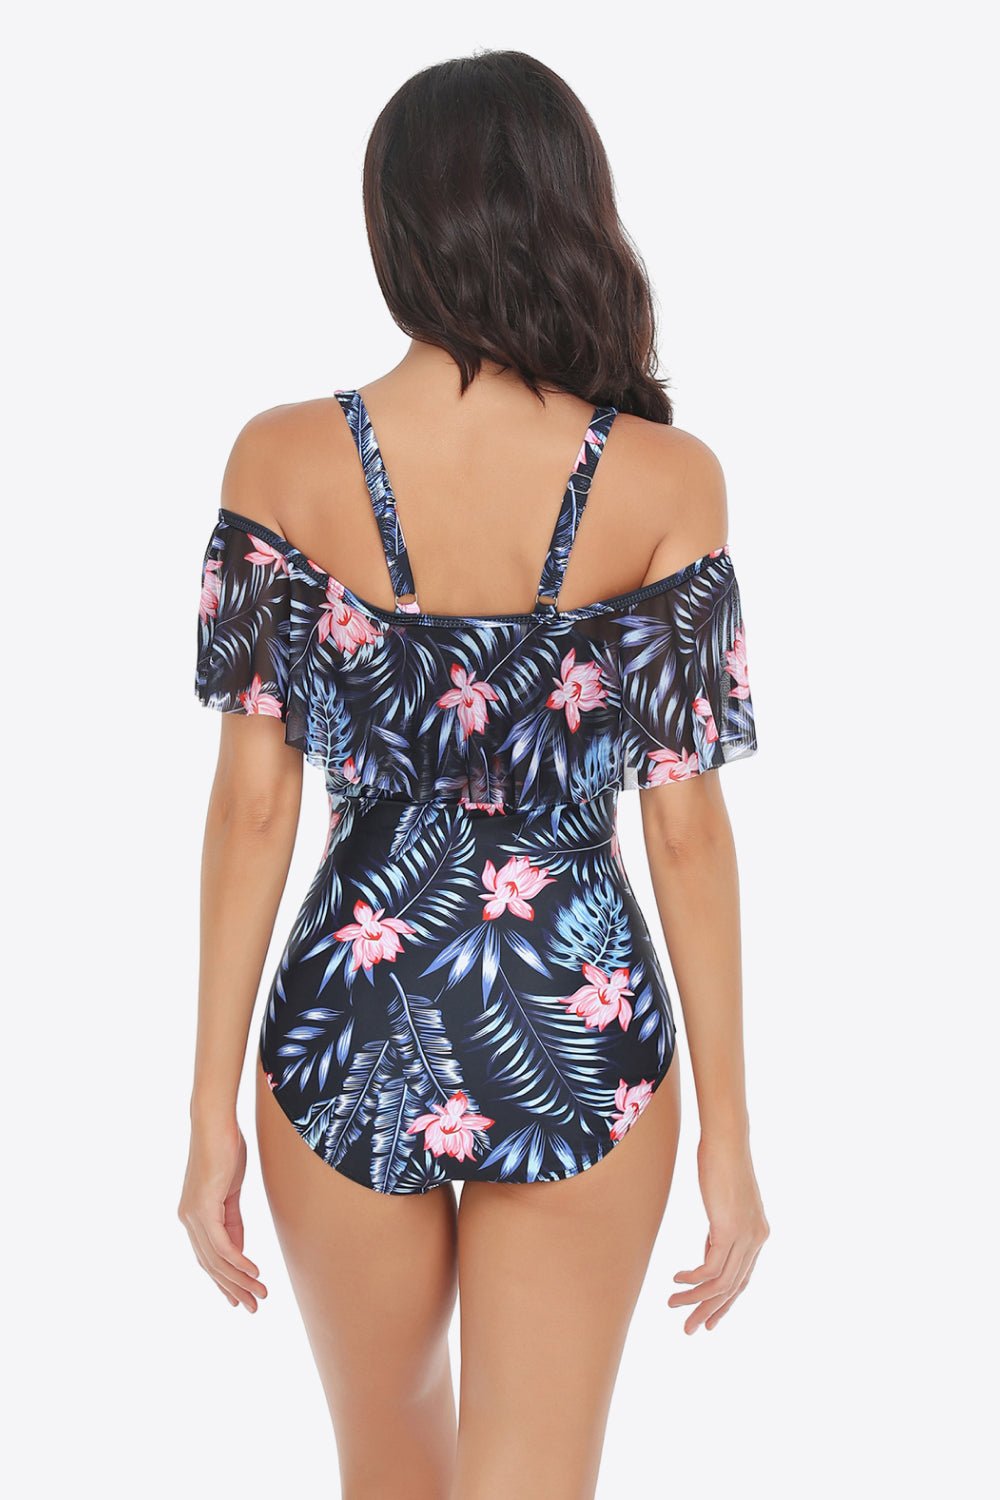 Goddess of Blooms - Unleash your Feminine Charm with our Botanical Print Cold-Shoulder Layered Swimsuit - Indulge in Elegance and Comfort. - Guy Christopher